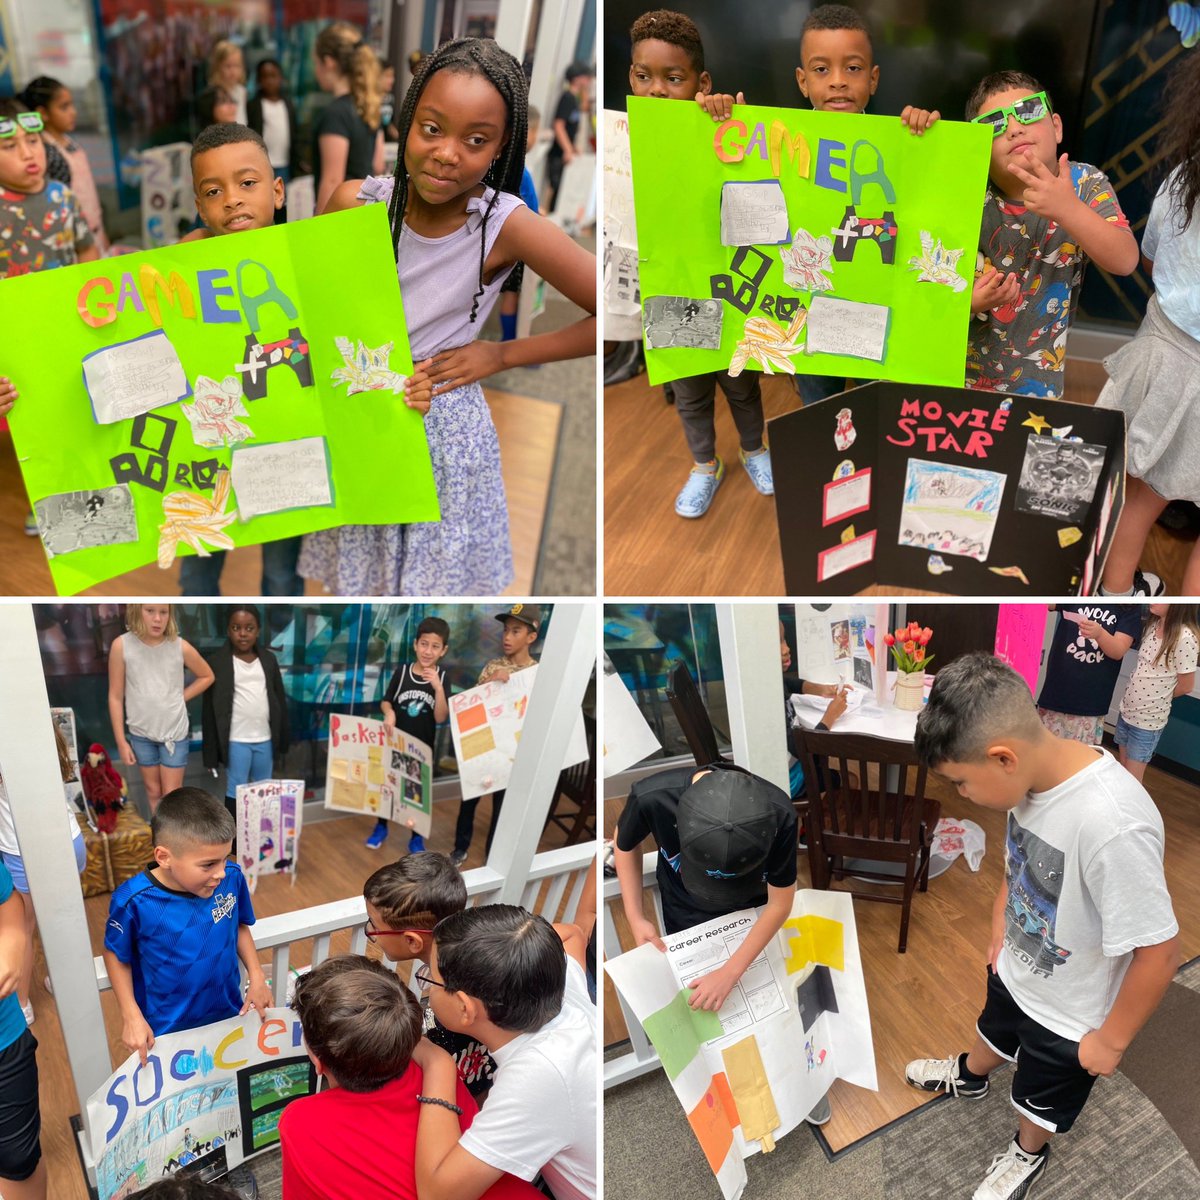 Today the kids got to show off their PBL Career Day. They have been working hard on researching and making their posters of their dream job. @HumbleISD_CE